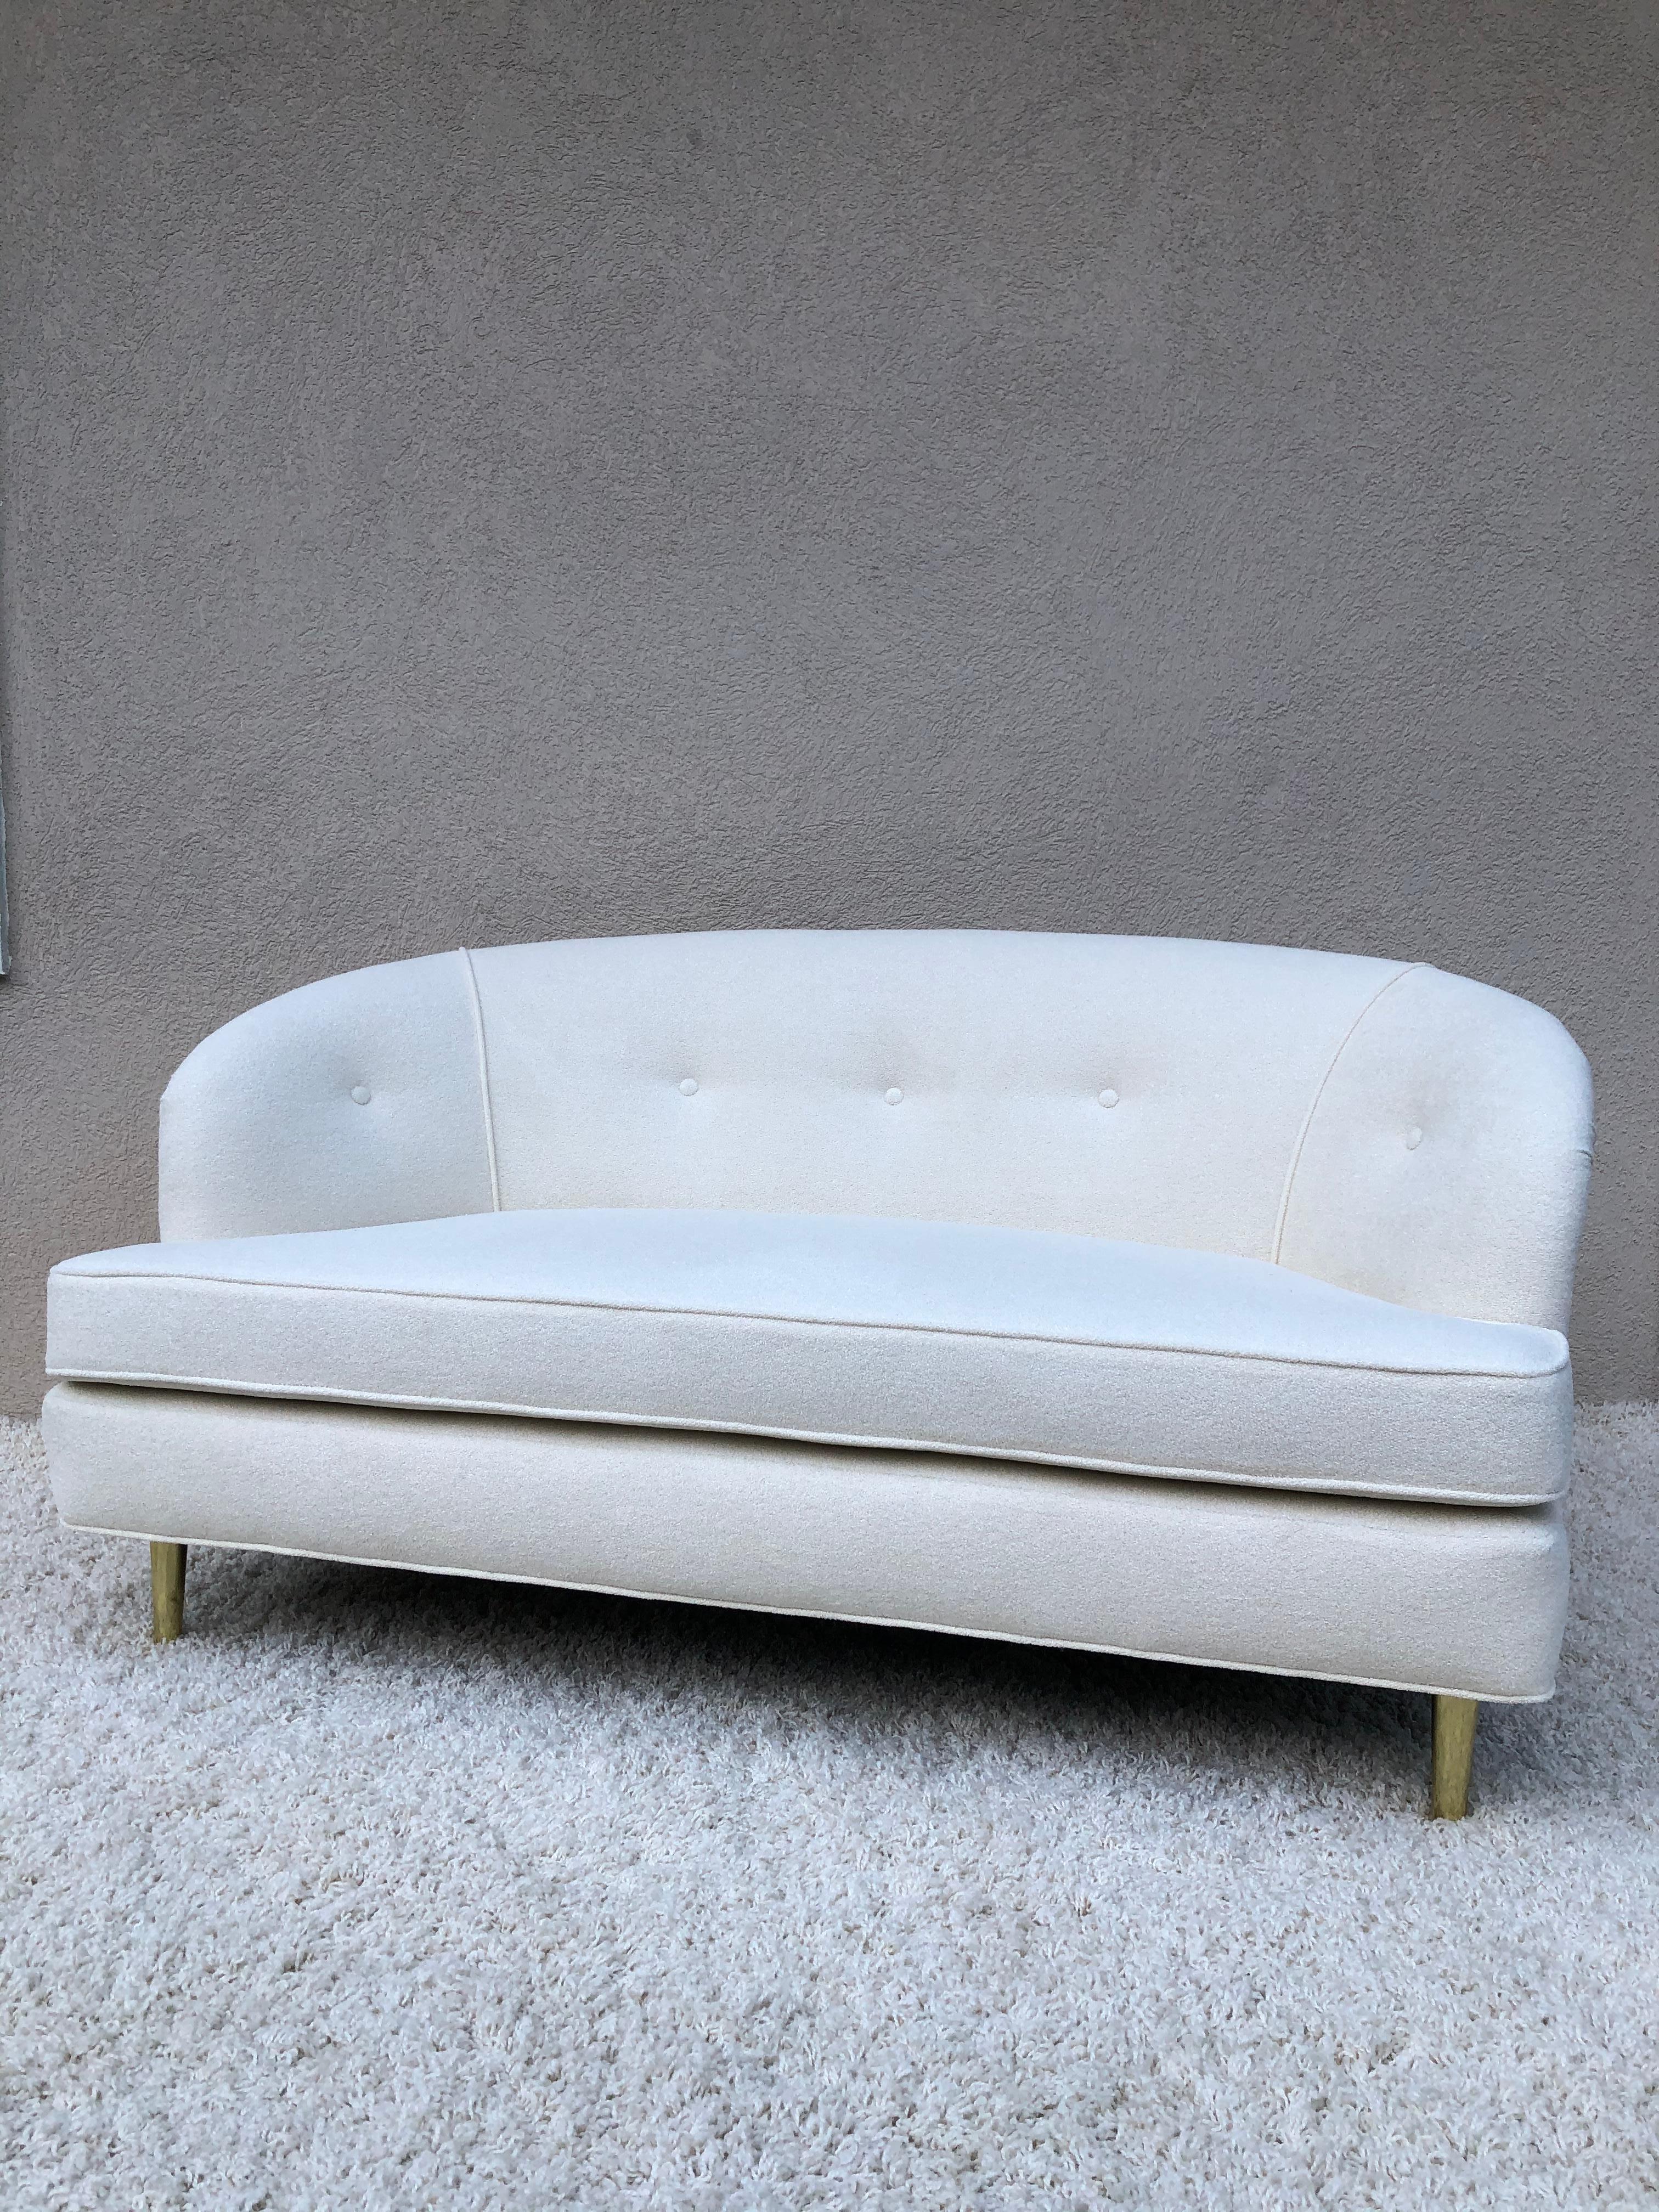 terry cloth couch